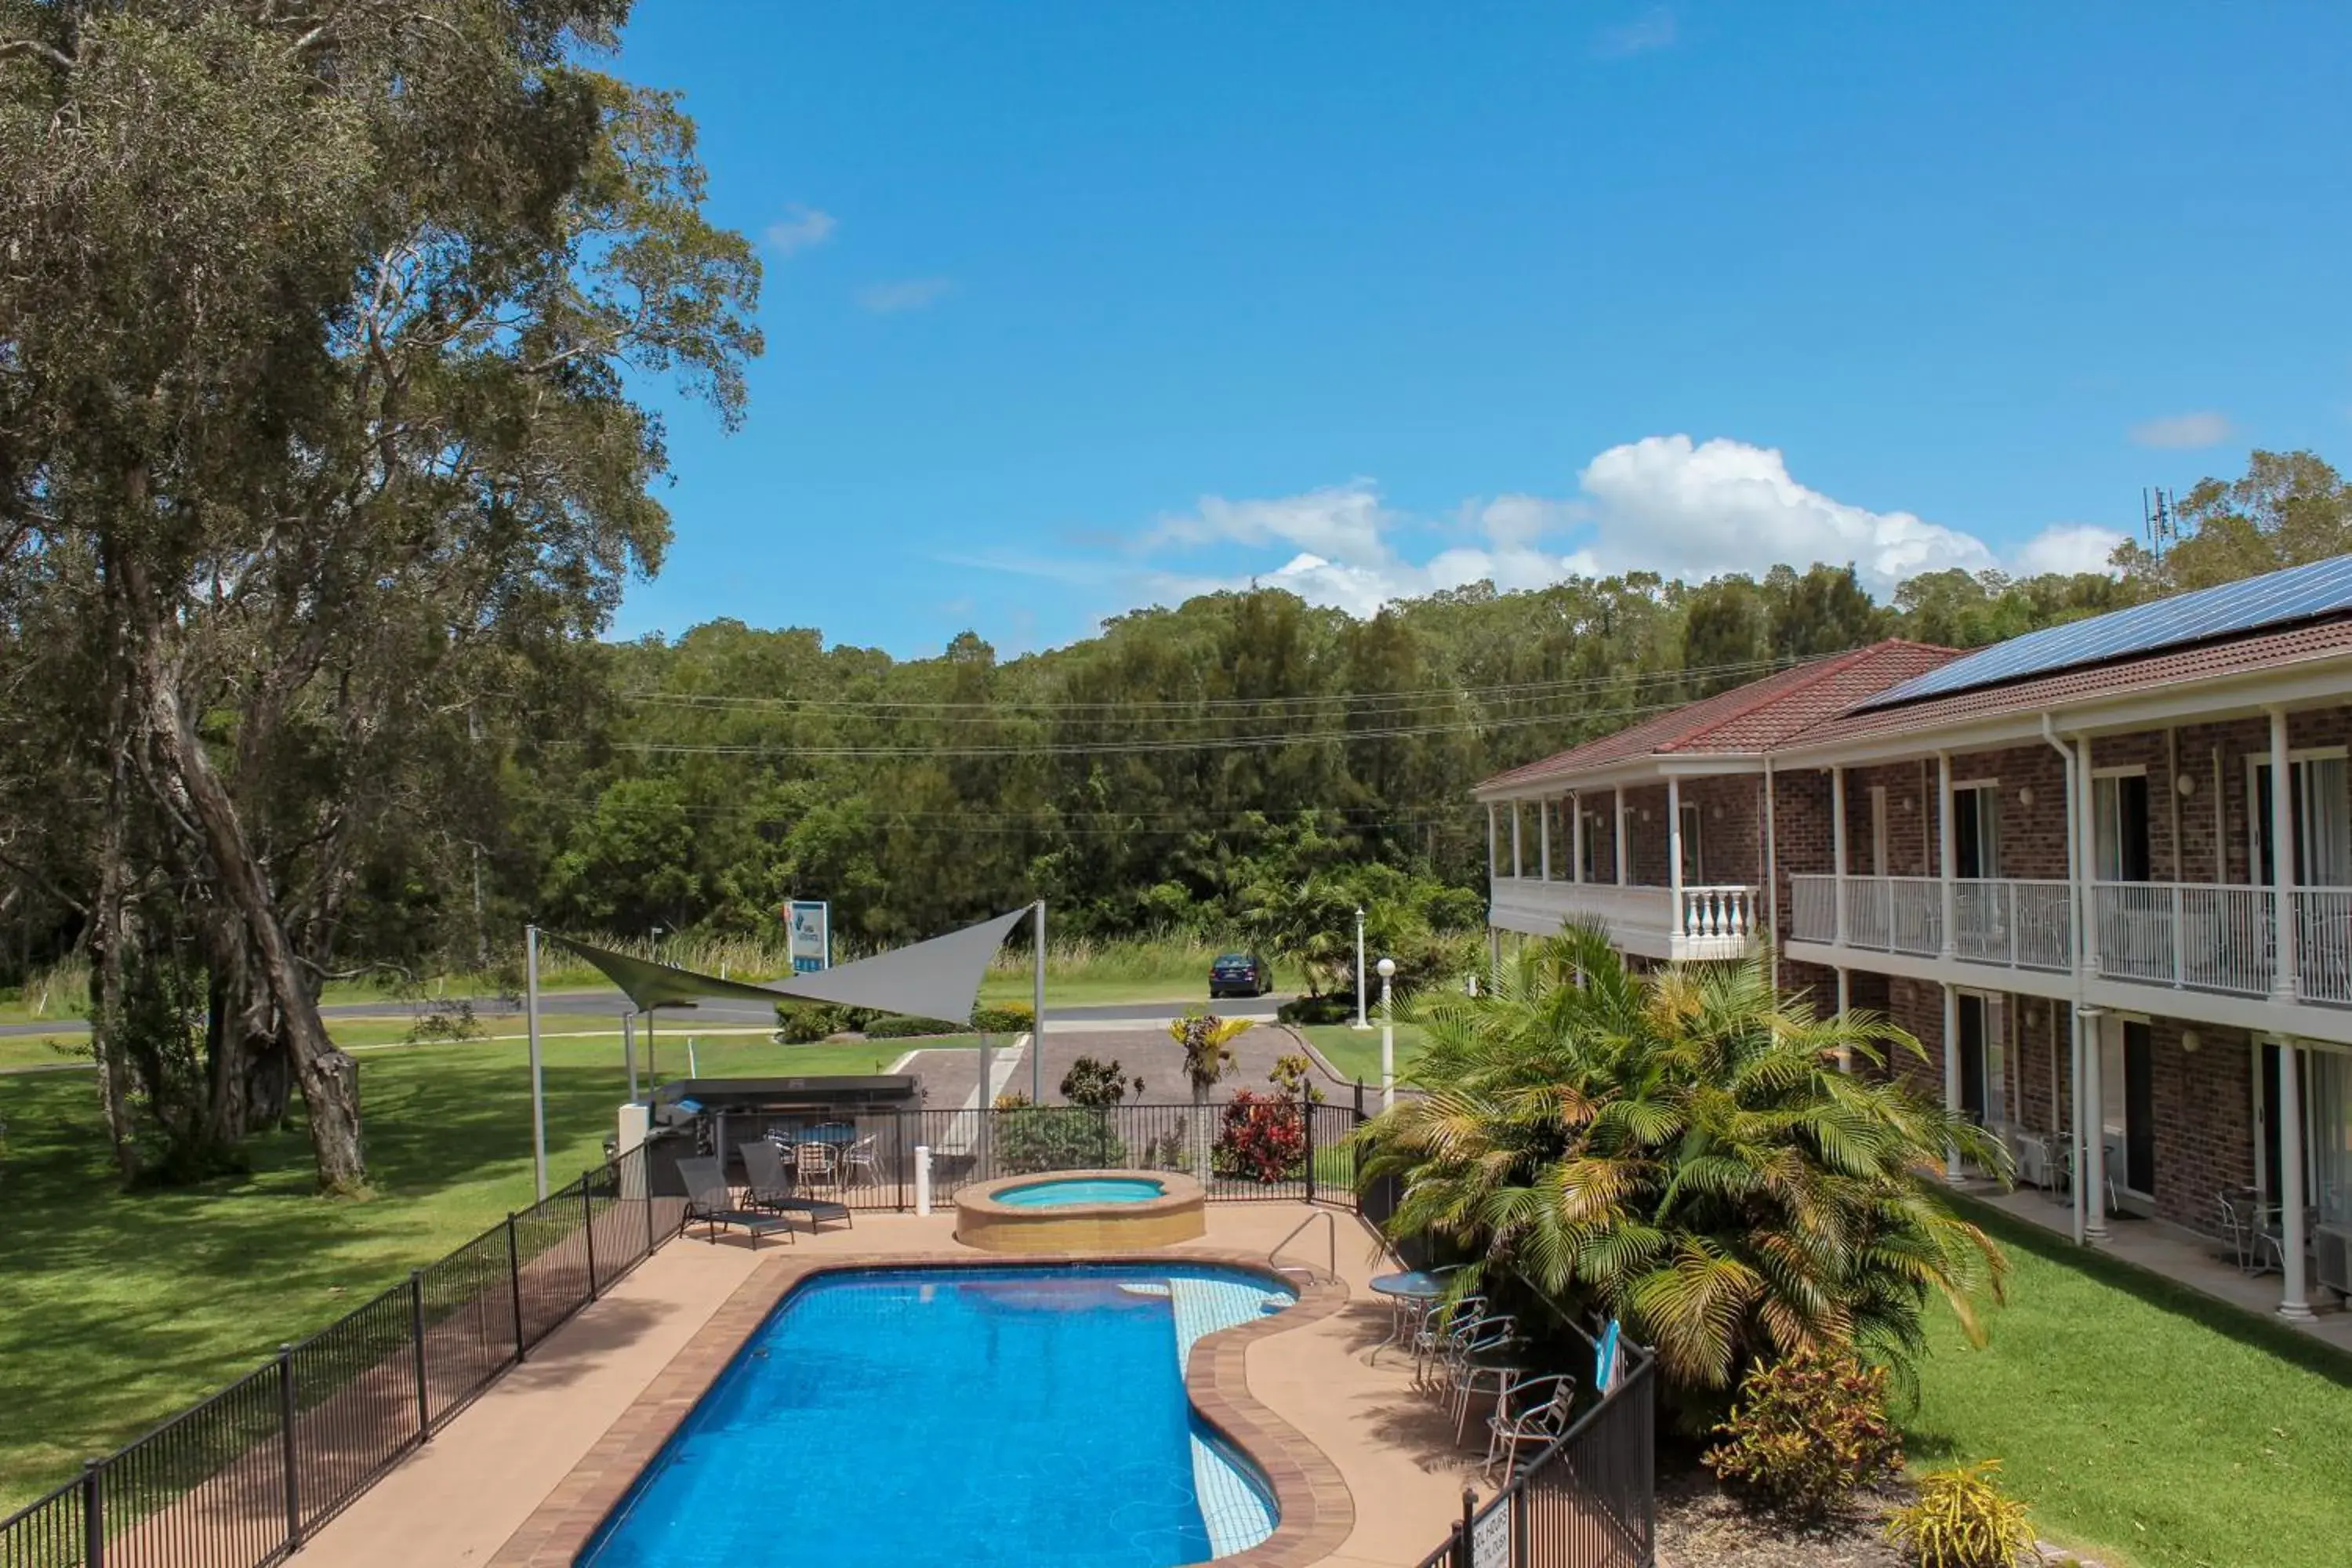 Property building, Pool View in Aston Motel Yamba